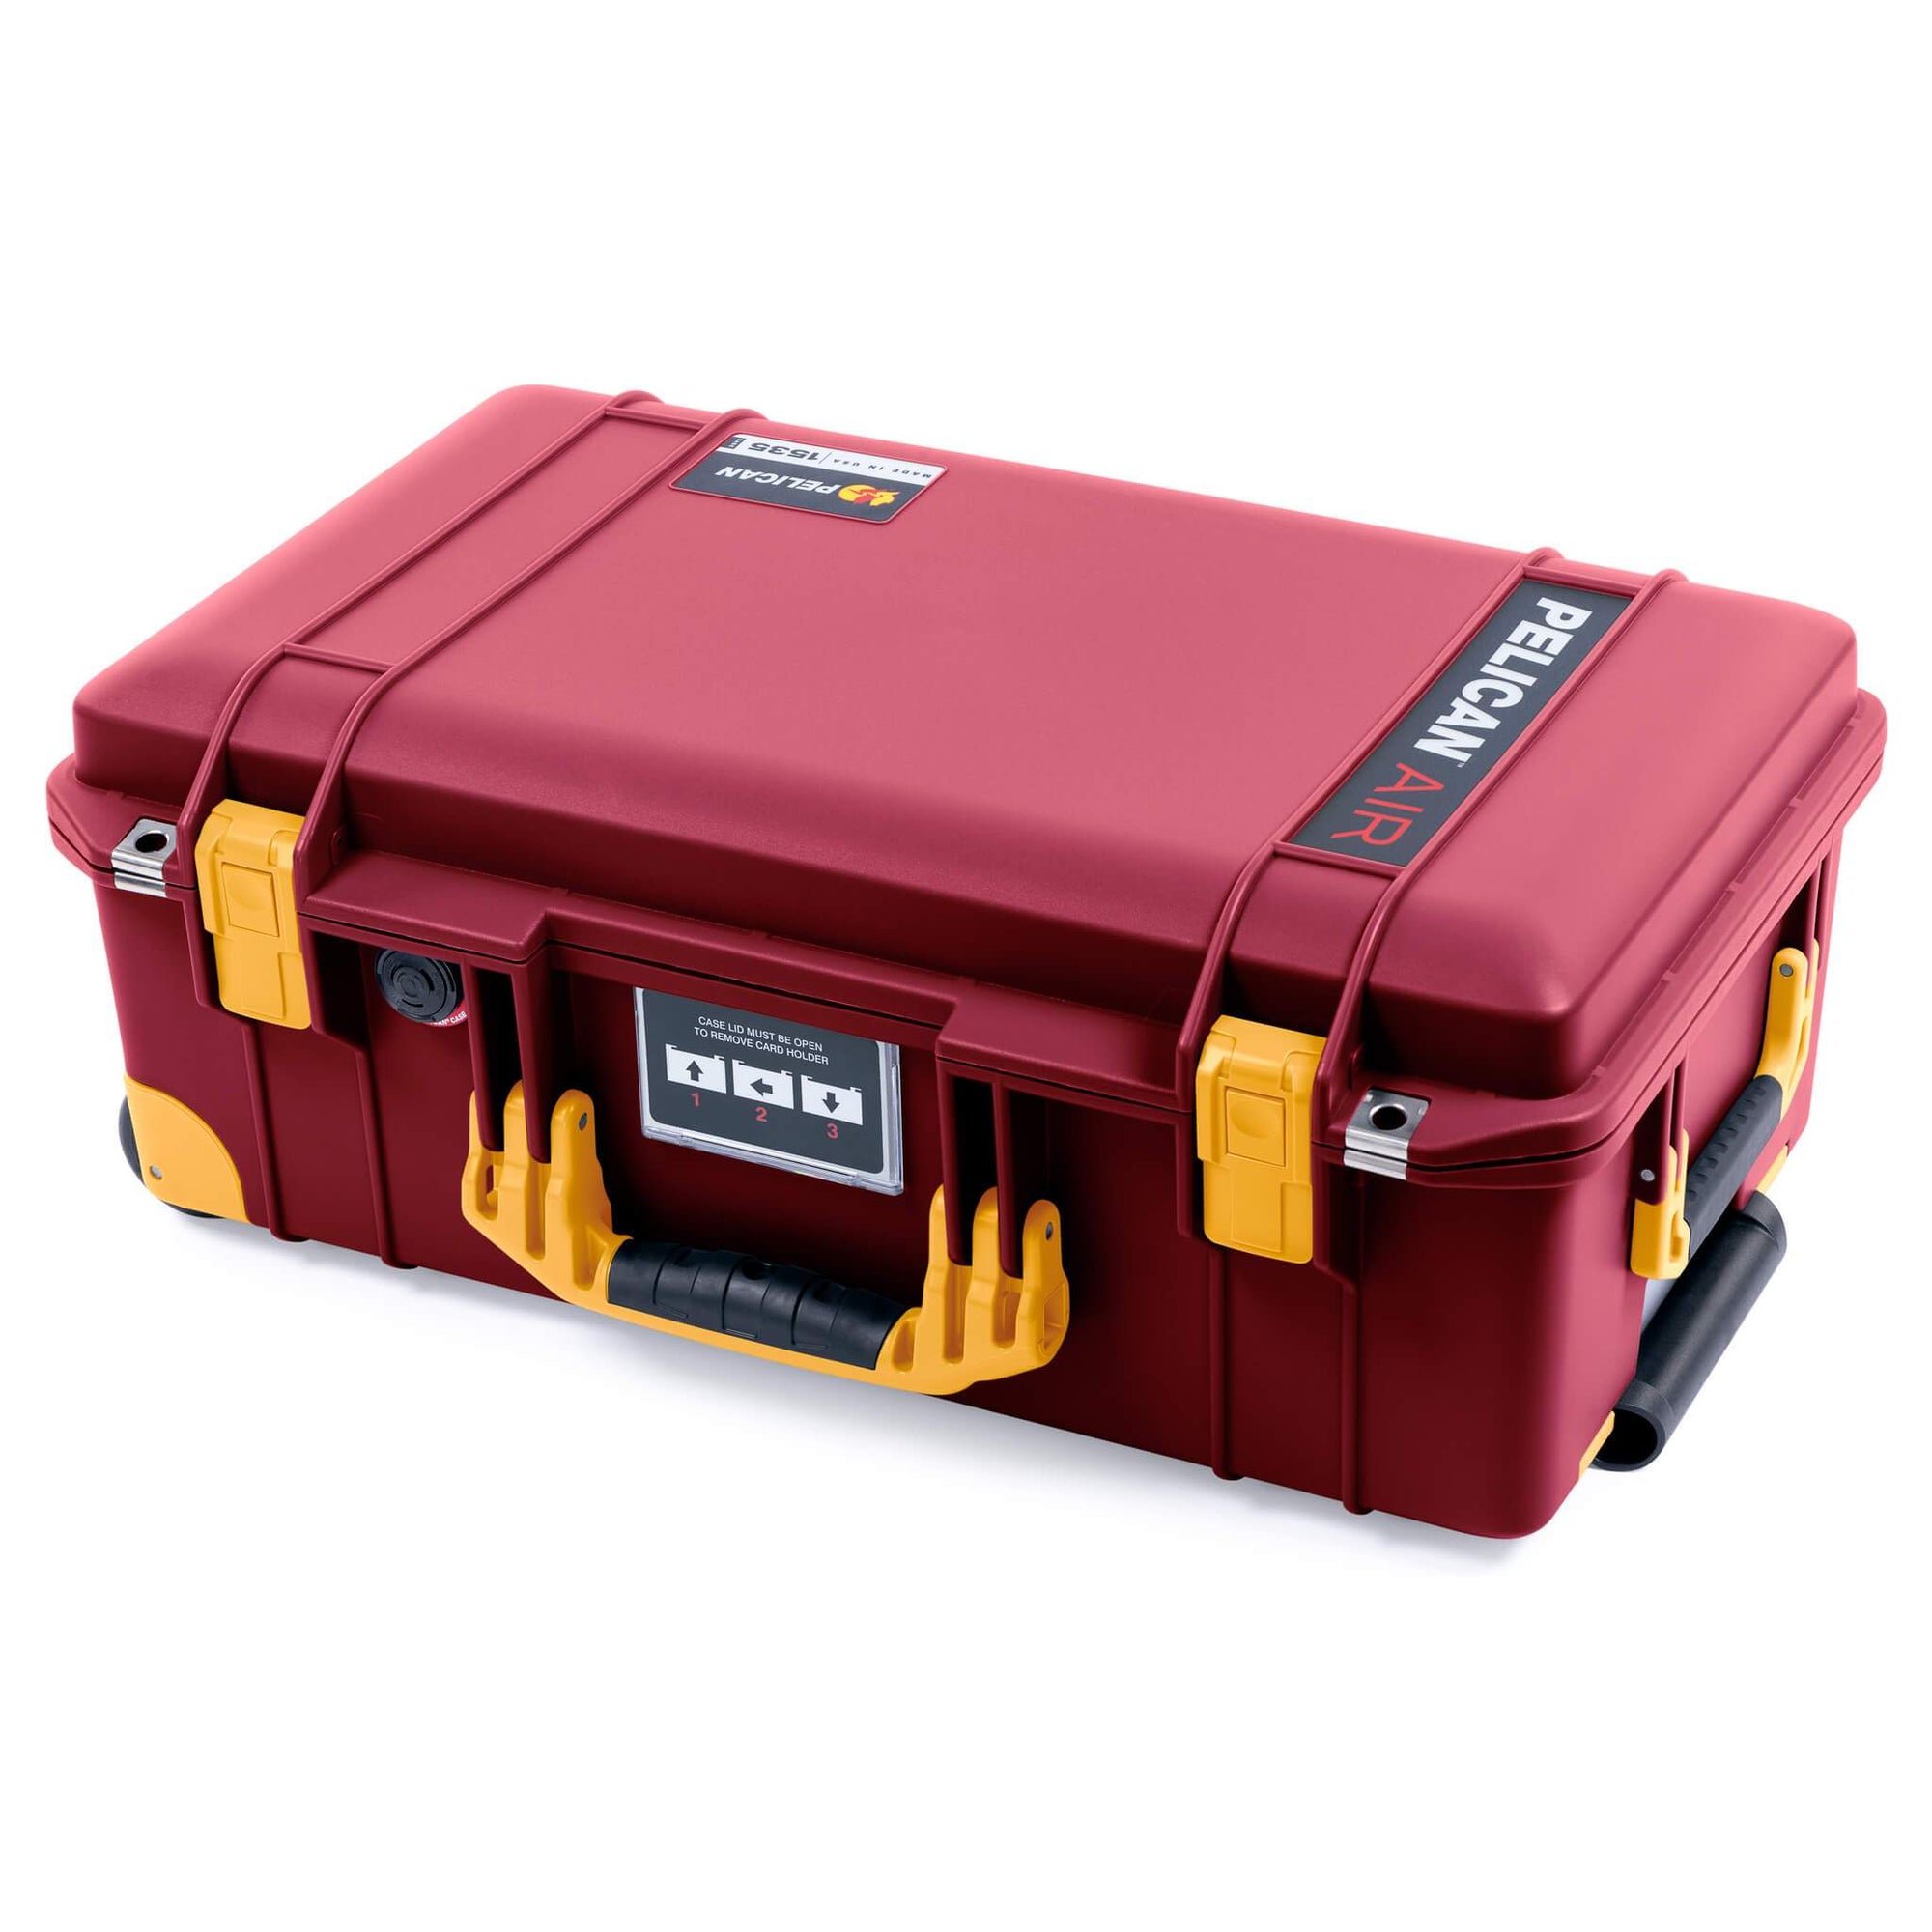 Pelican 1535 Air Case, Oxblood with Yellow Handles, Push-Button Latches & Trolley ColorCase 